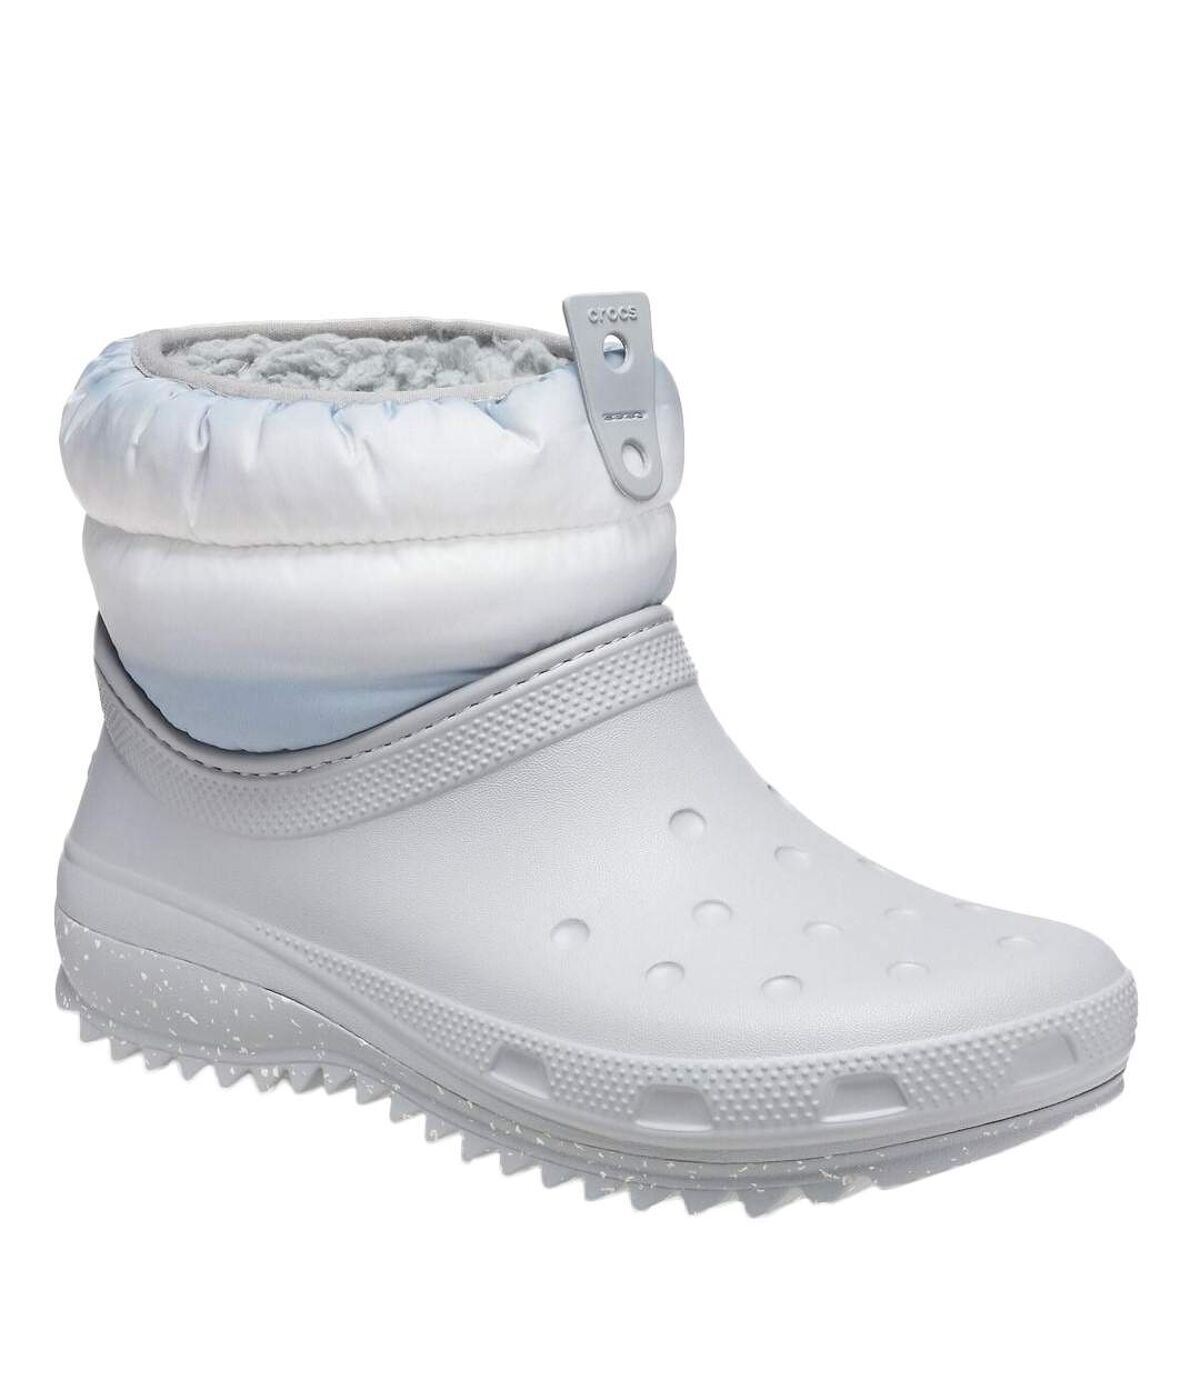 Crocs Womens/Ladies Classic Neo Puff Shorty Ankle Boots (Light Grey/White) - UTFS8394